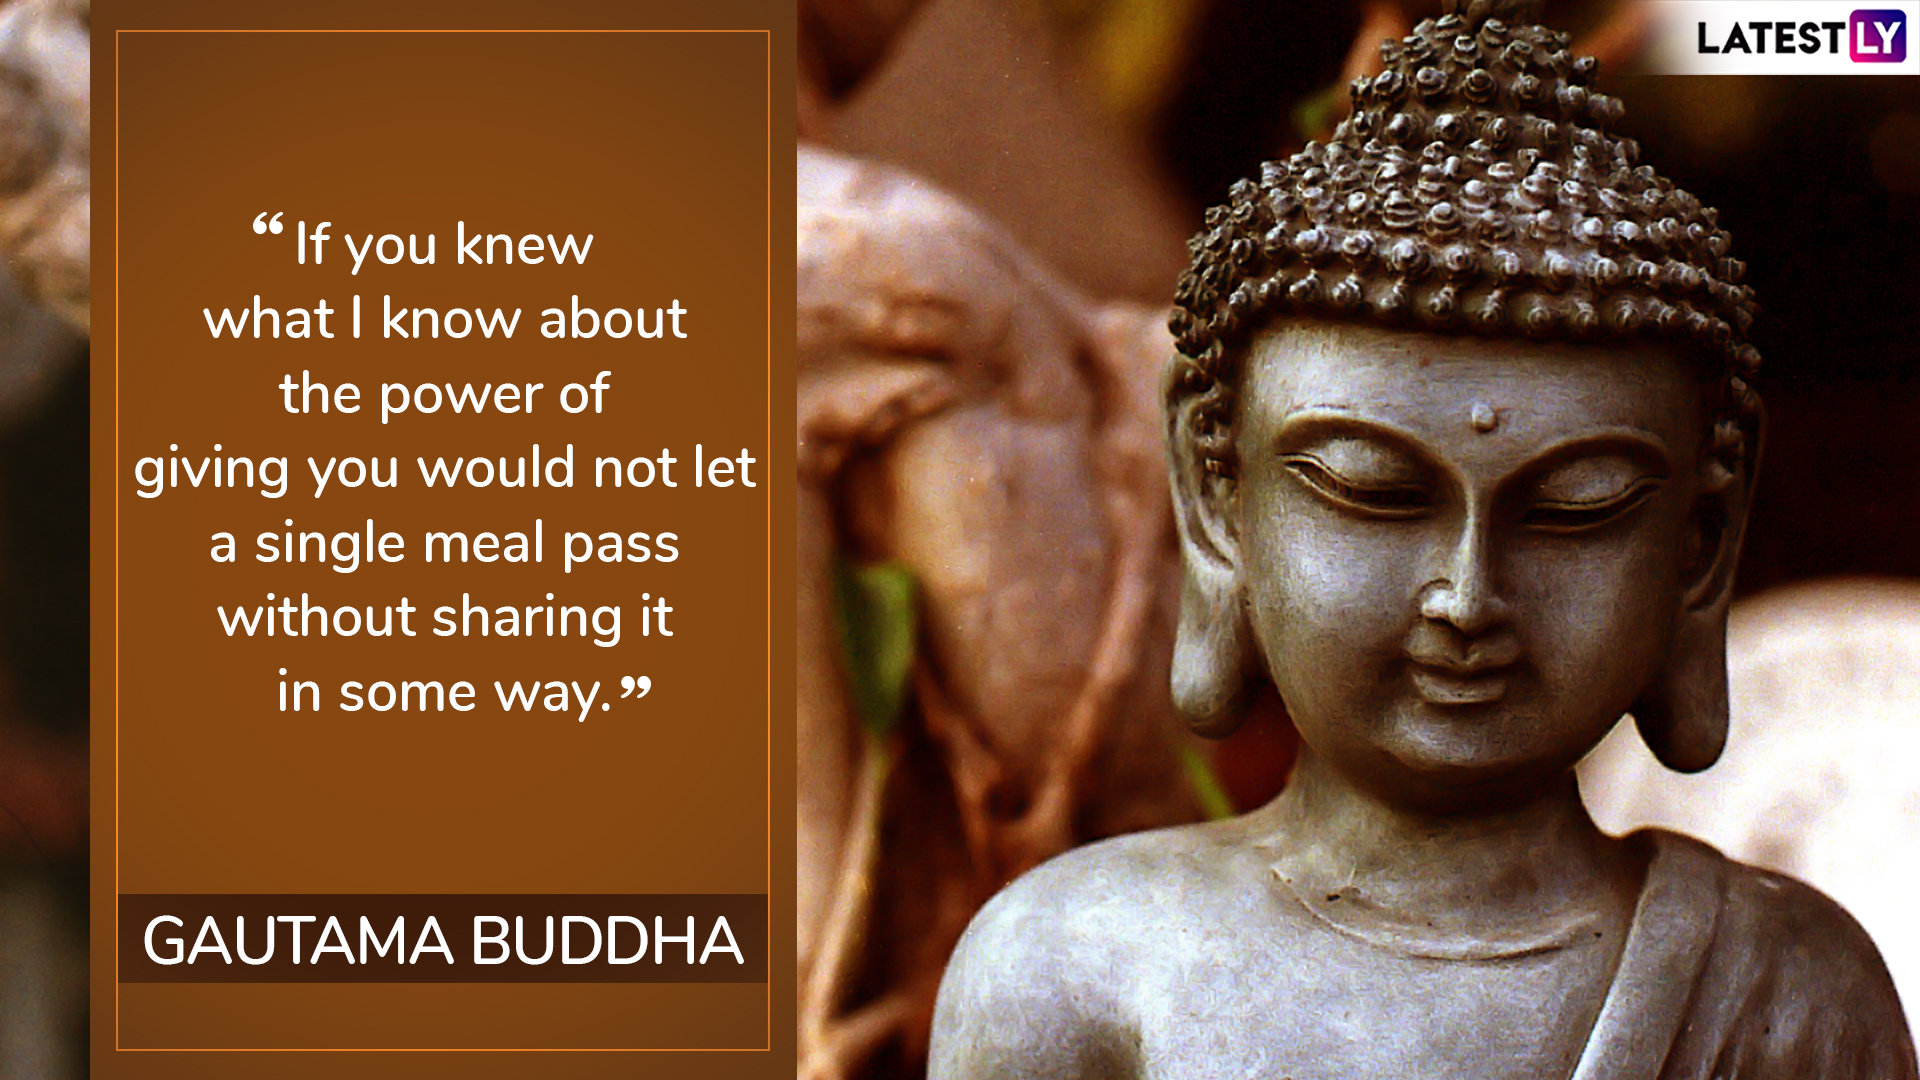 Buddha Purnima 2019 Quotes and Messages: Share These Inspirational ...